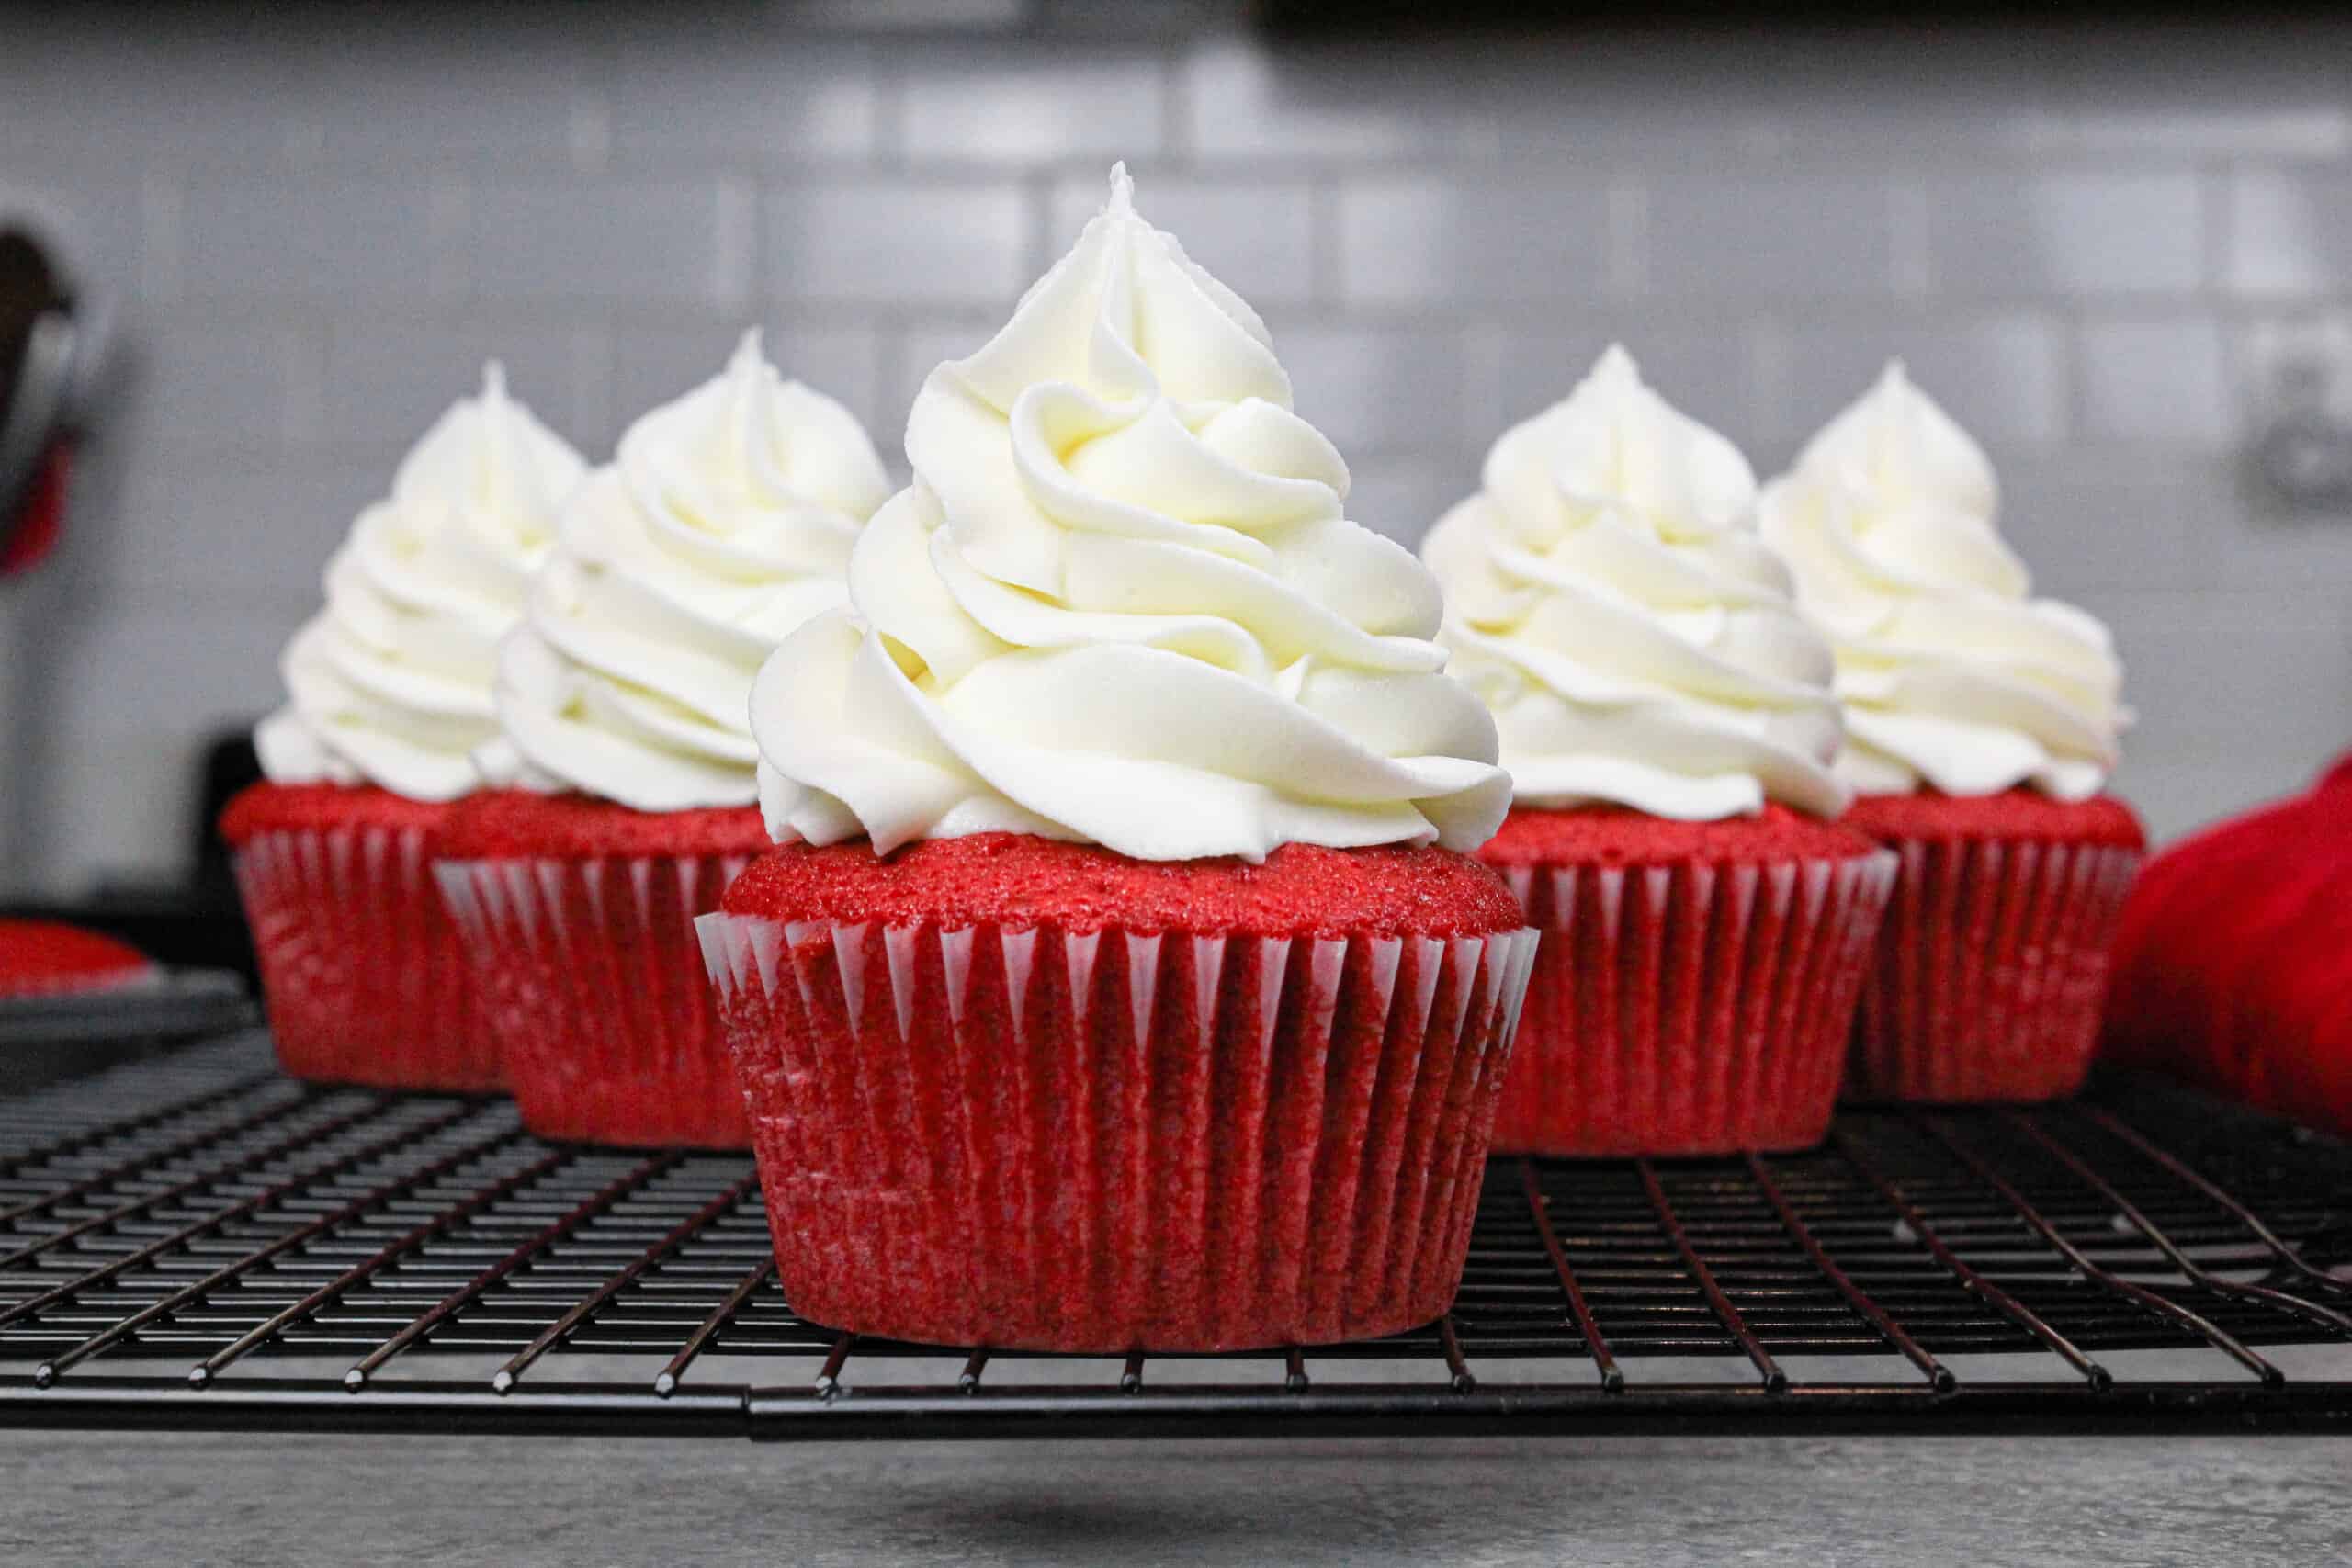 image of red velvet cupcakes made with buttermilk